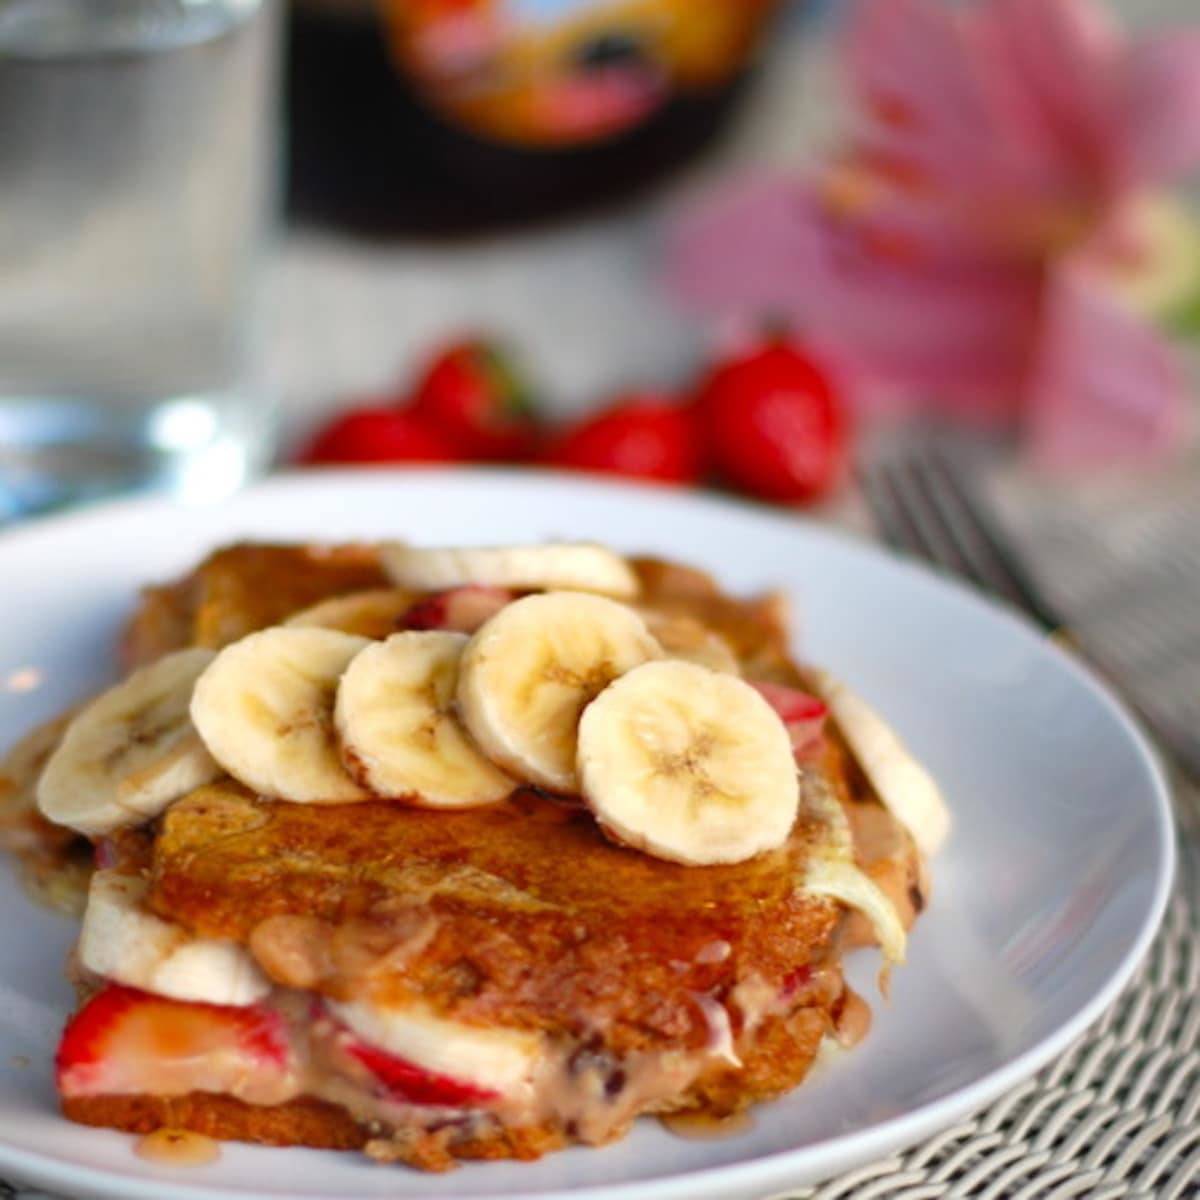 Stuffed French Toast with strawberries, bananas, and maple syrup on a plate.